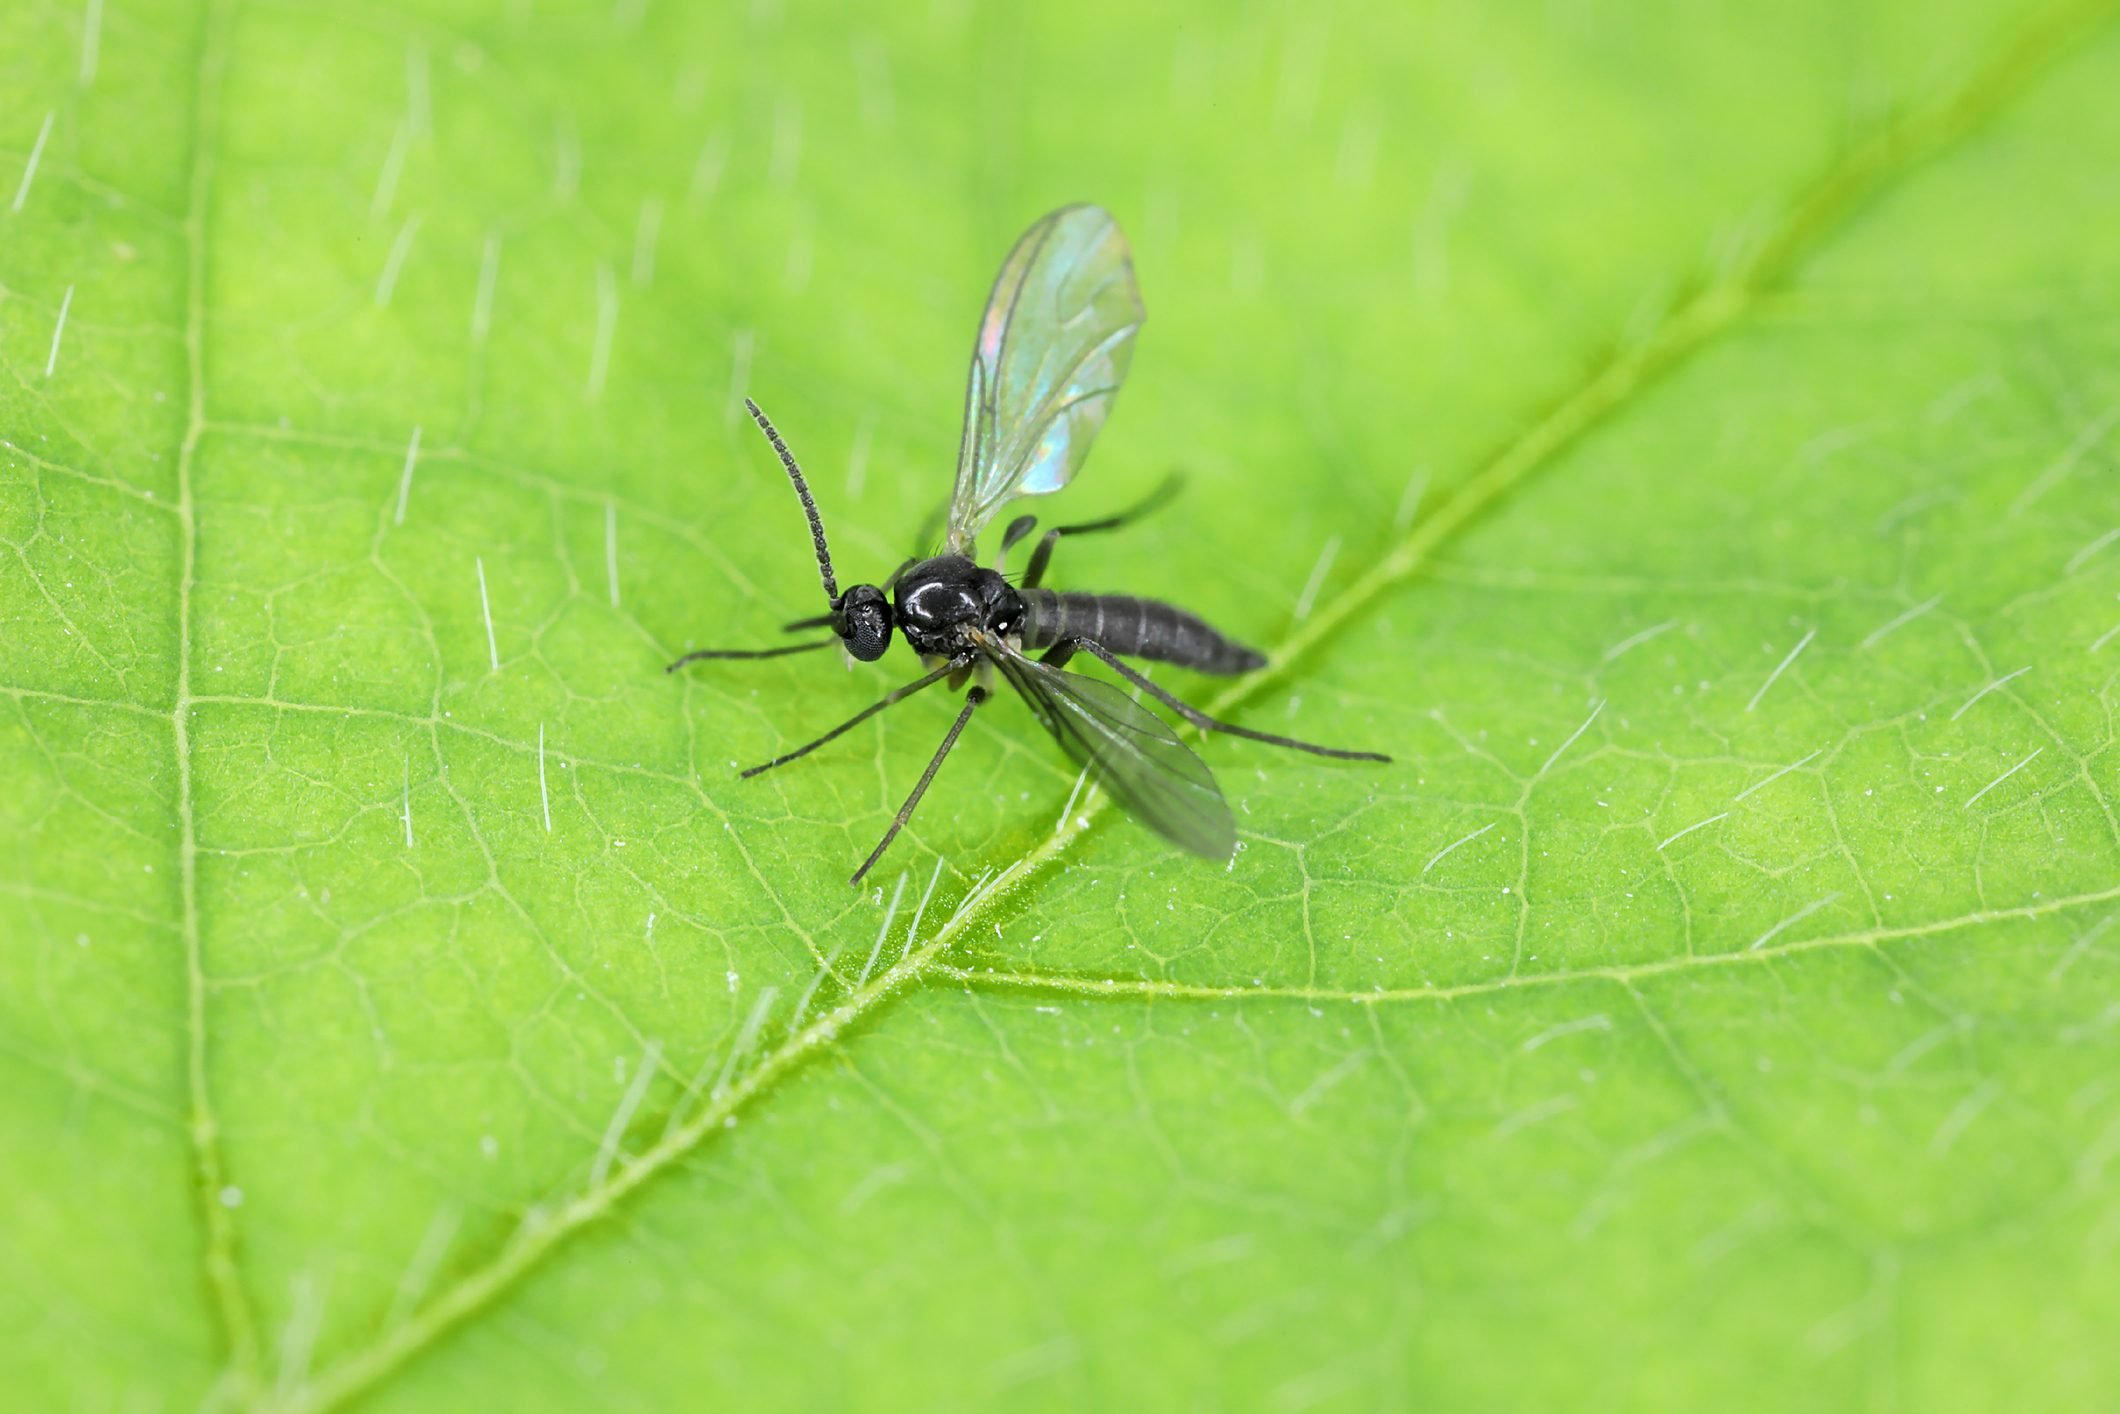 8 Ways to Get Rid of Fungus Gnats